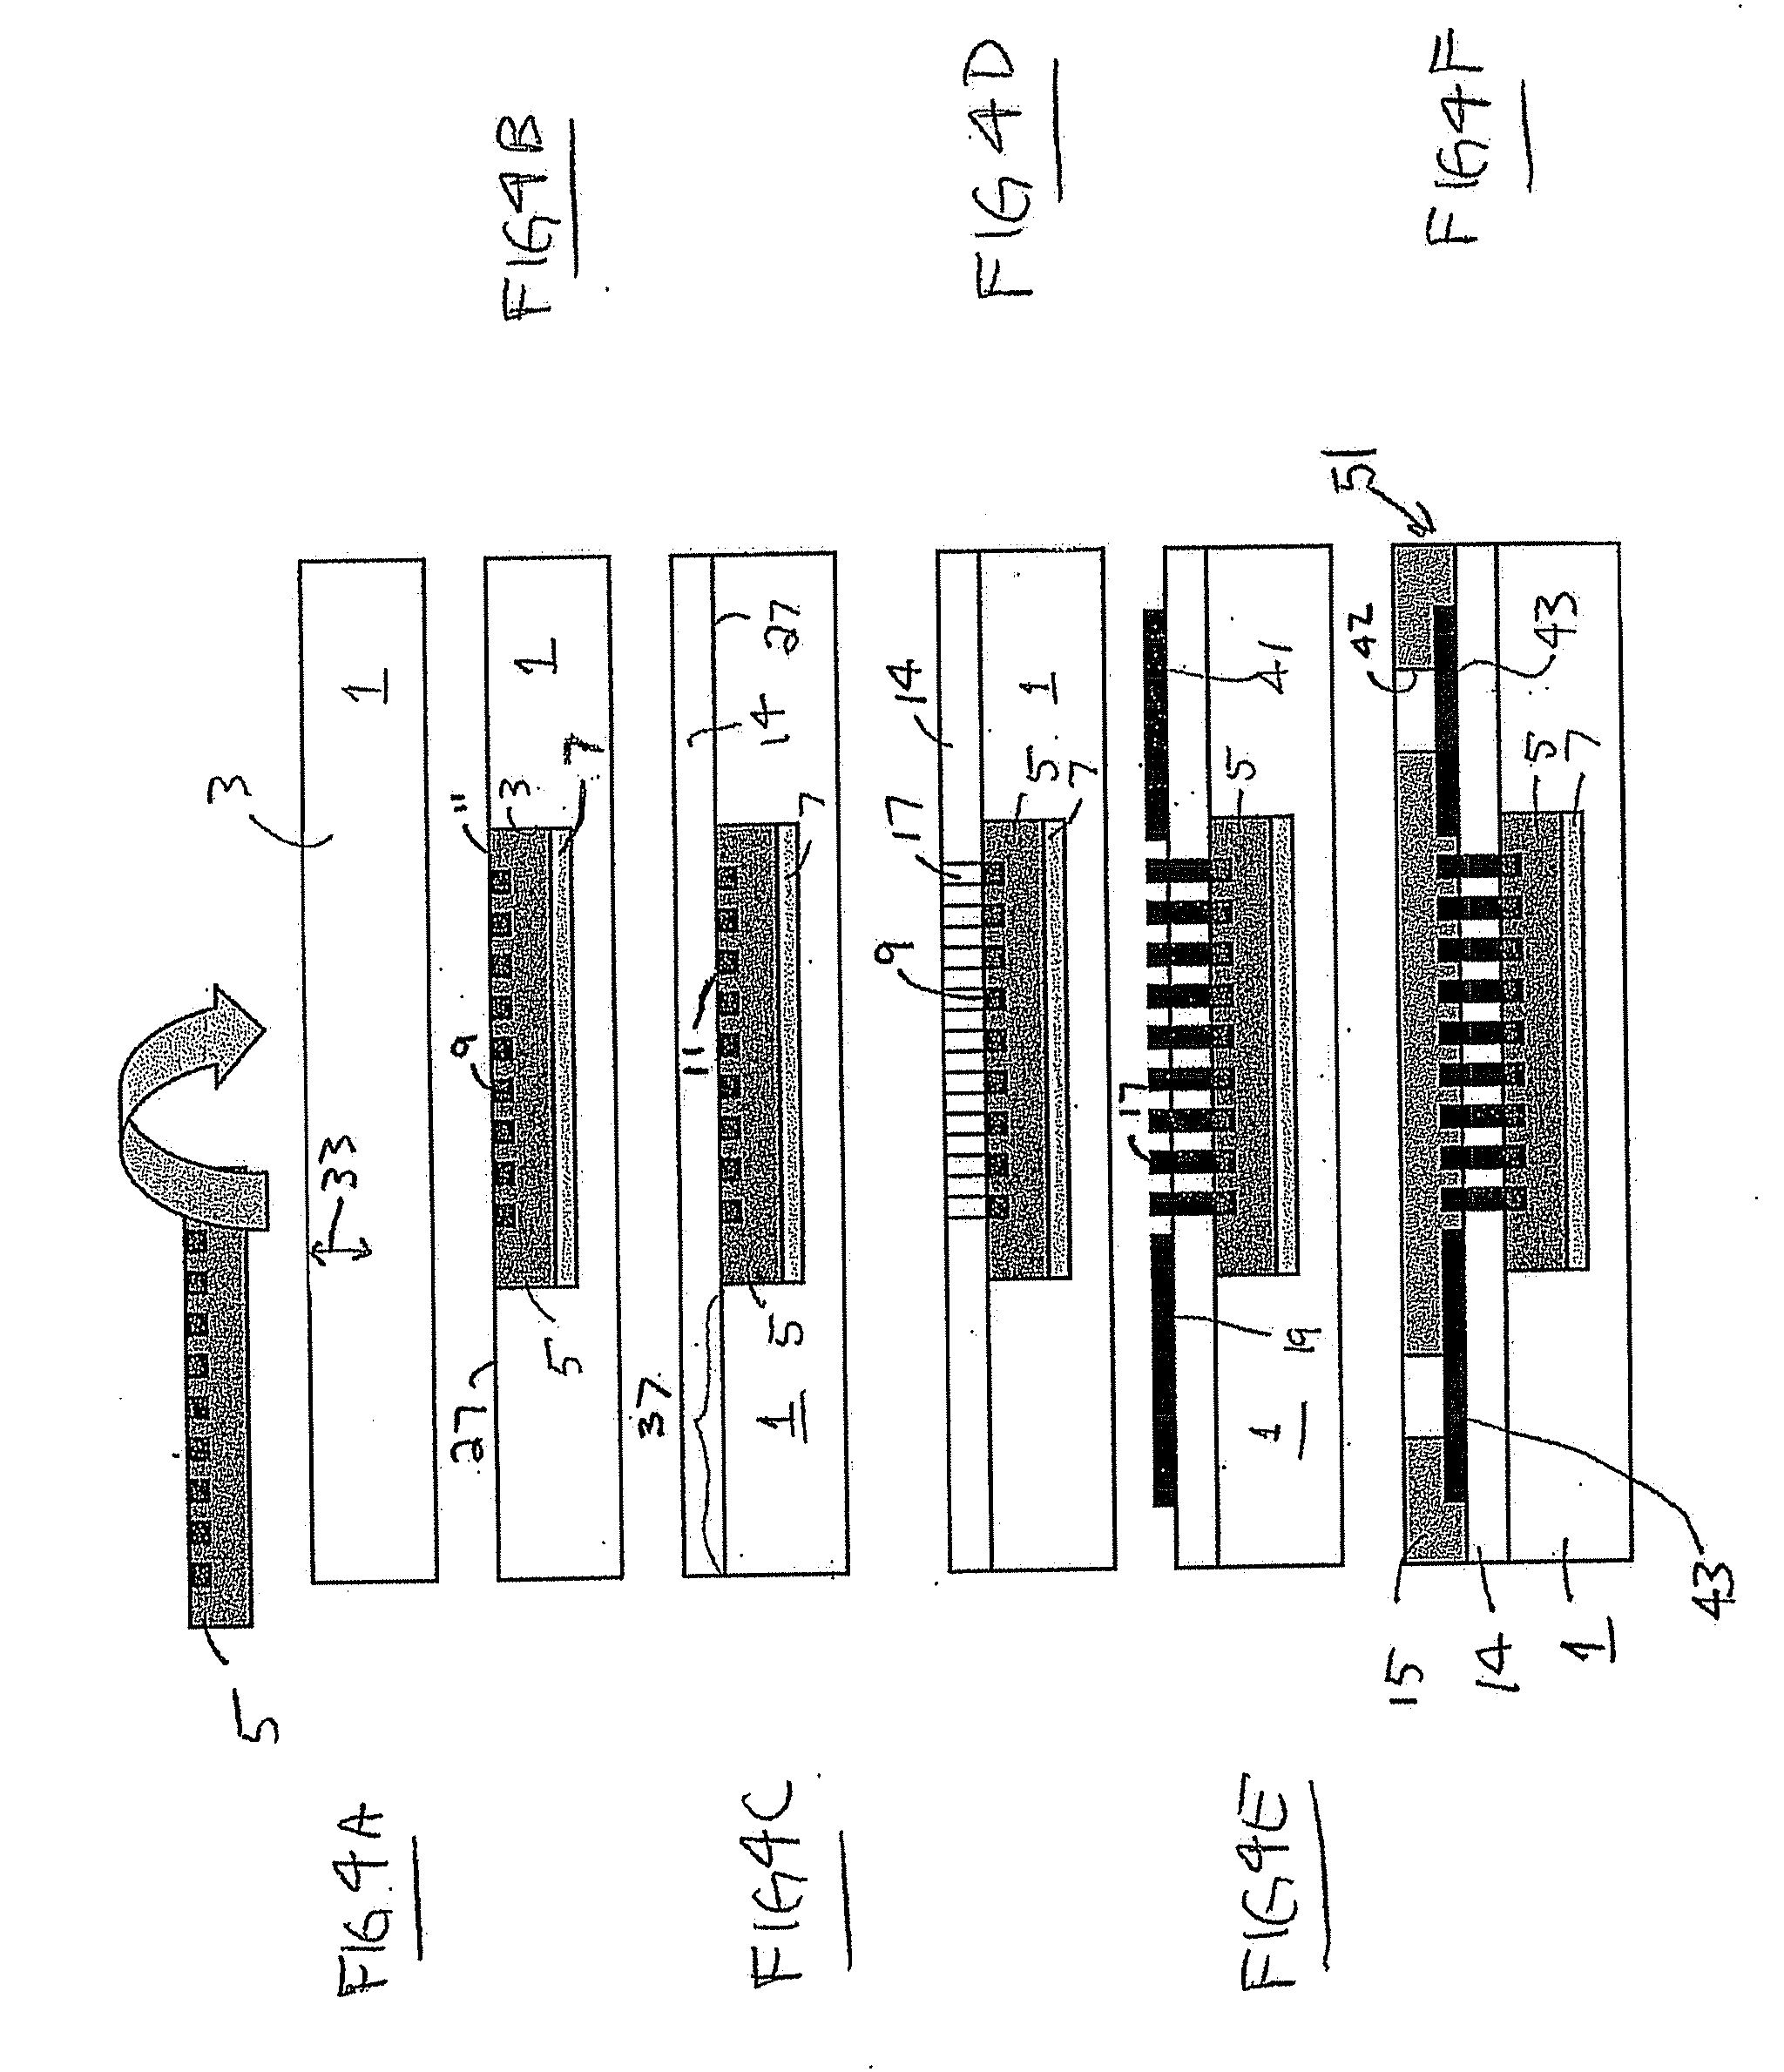 Chip holder with wafer level redistribution layer